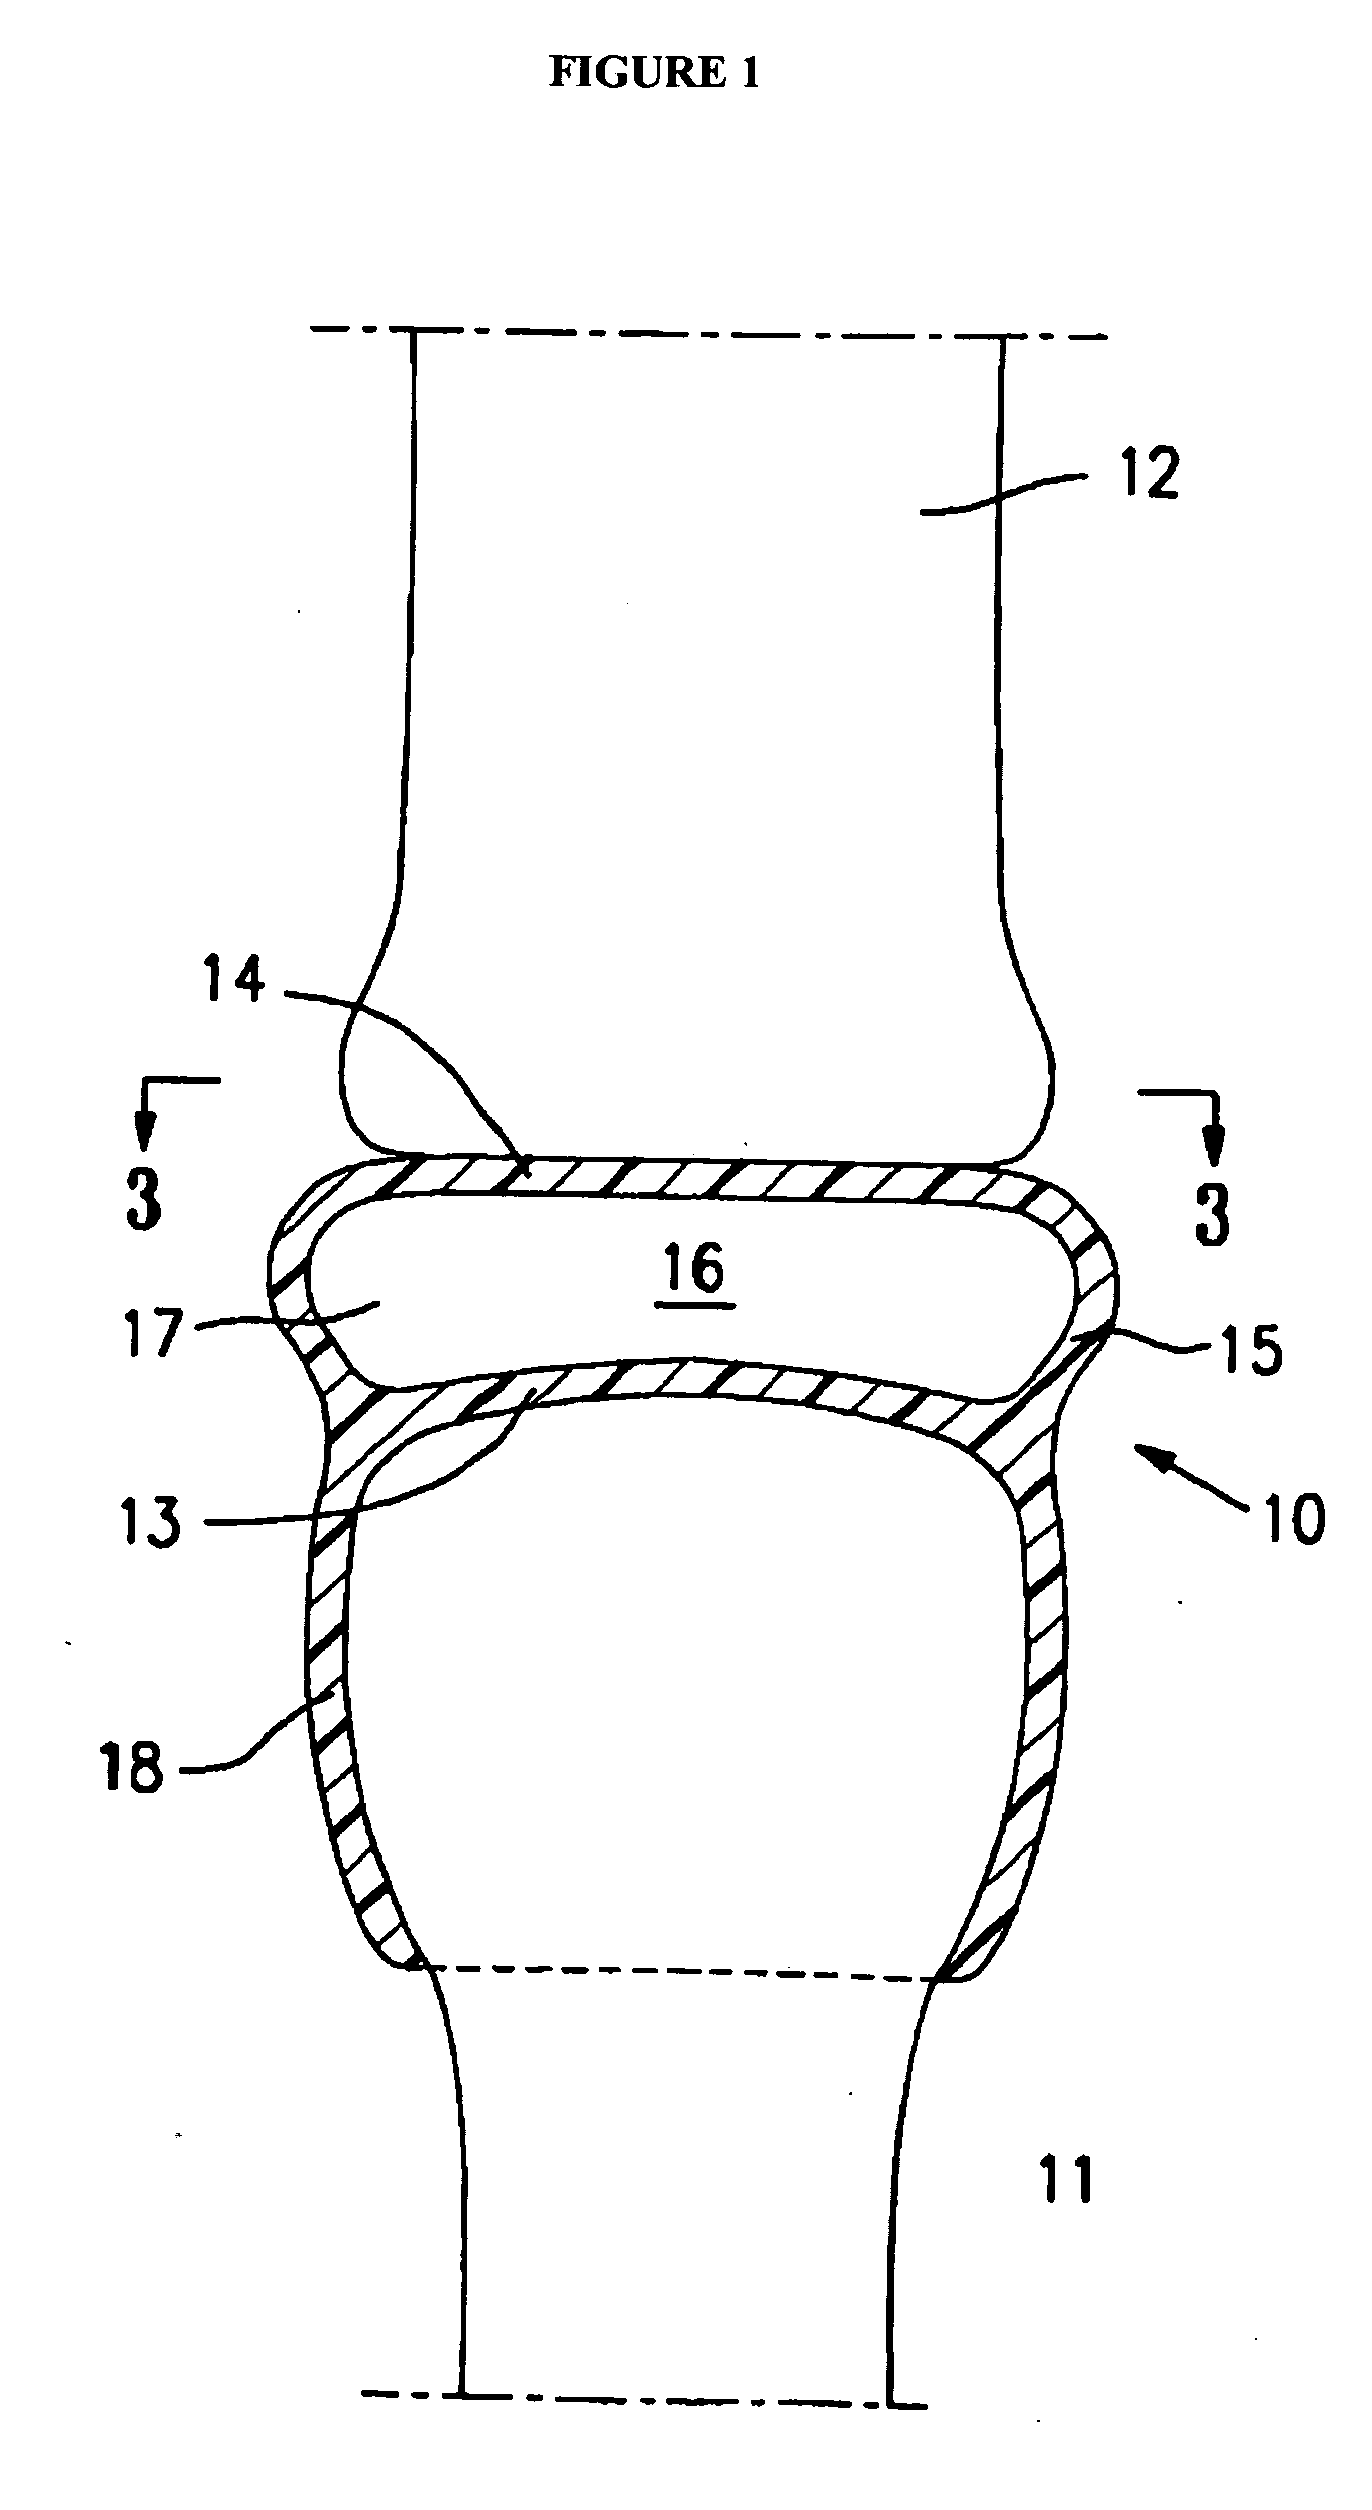 Resilient medically inflatable interpositional arthroplasty device